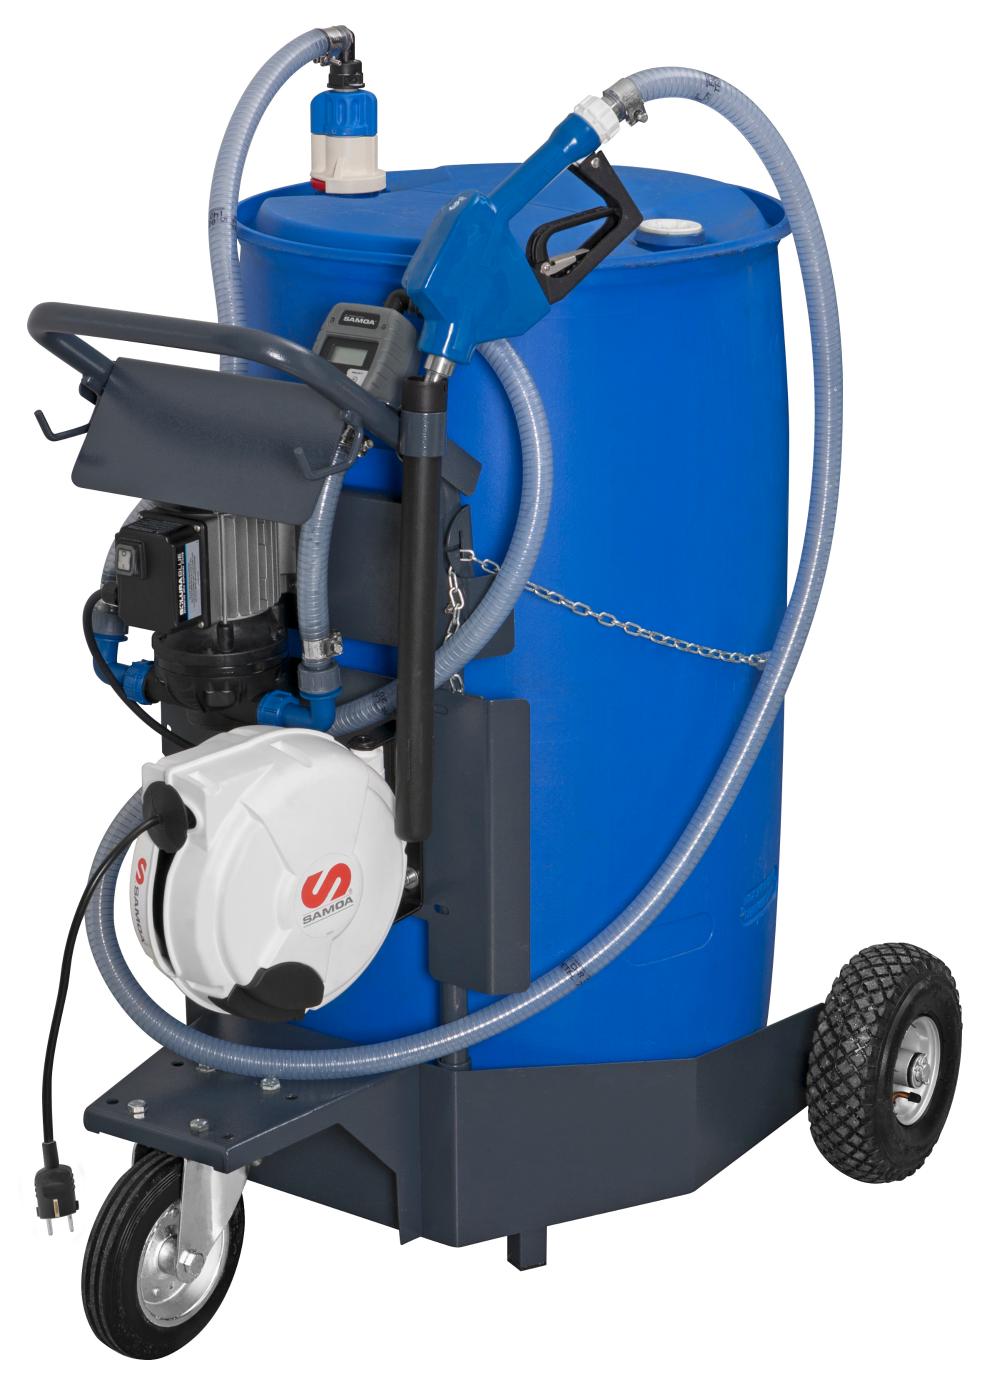 230 V SOLURA SERIES MOBILE ELECTRIC PUMP PACKAGE FOR ADBLUE/DEF WITH AUTOMATIC NOZZLE, METER AND CABLE REEL, 205 L DRUMS, 30 L/MIN